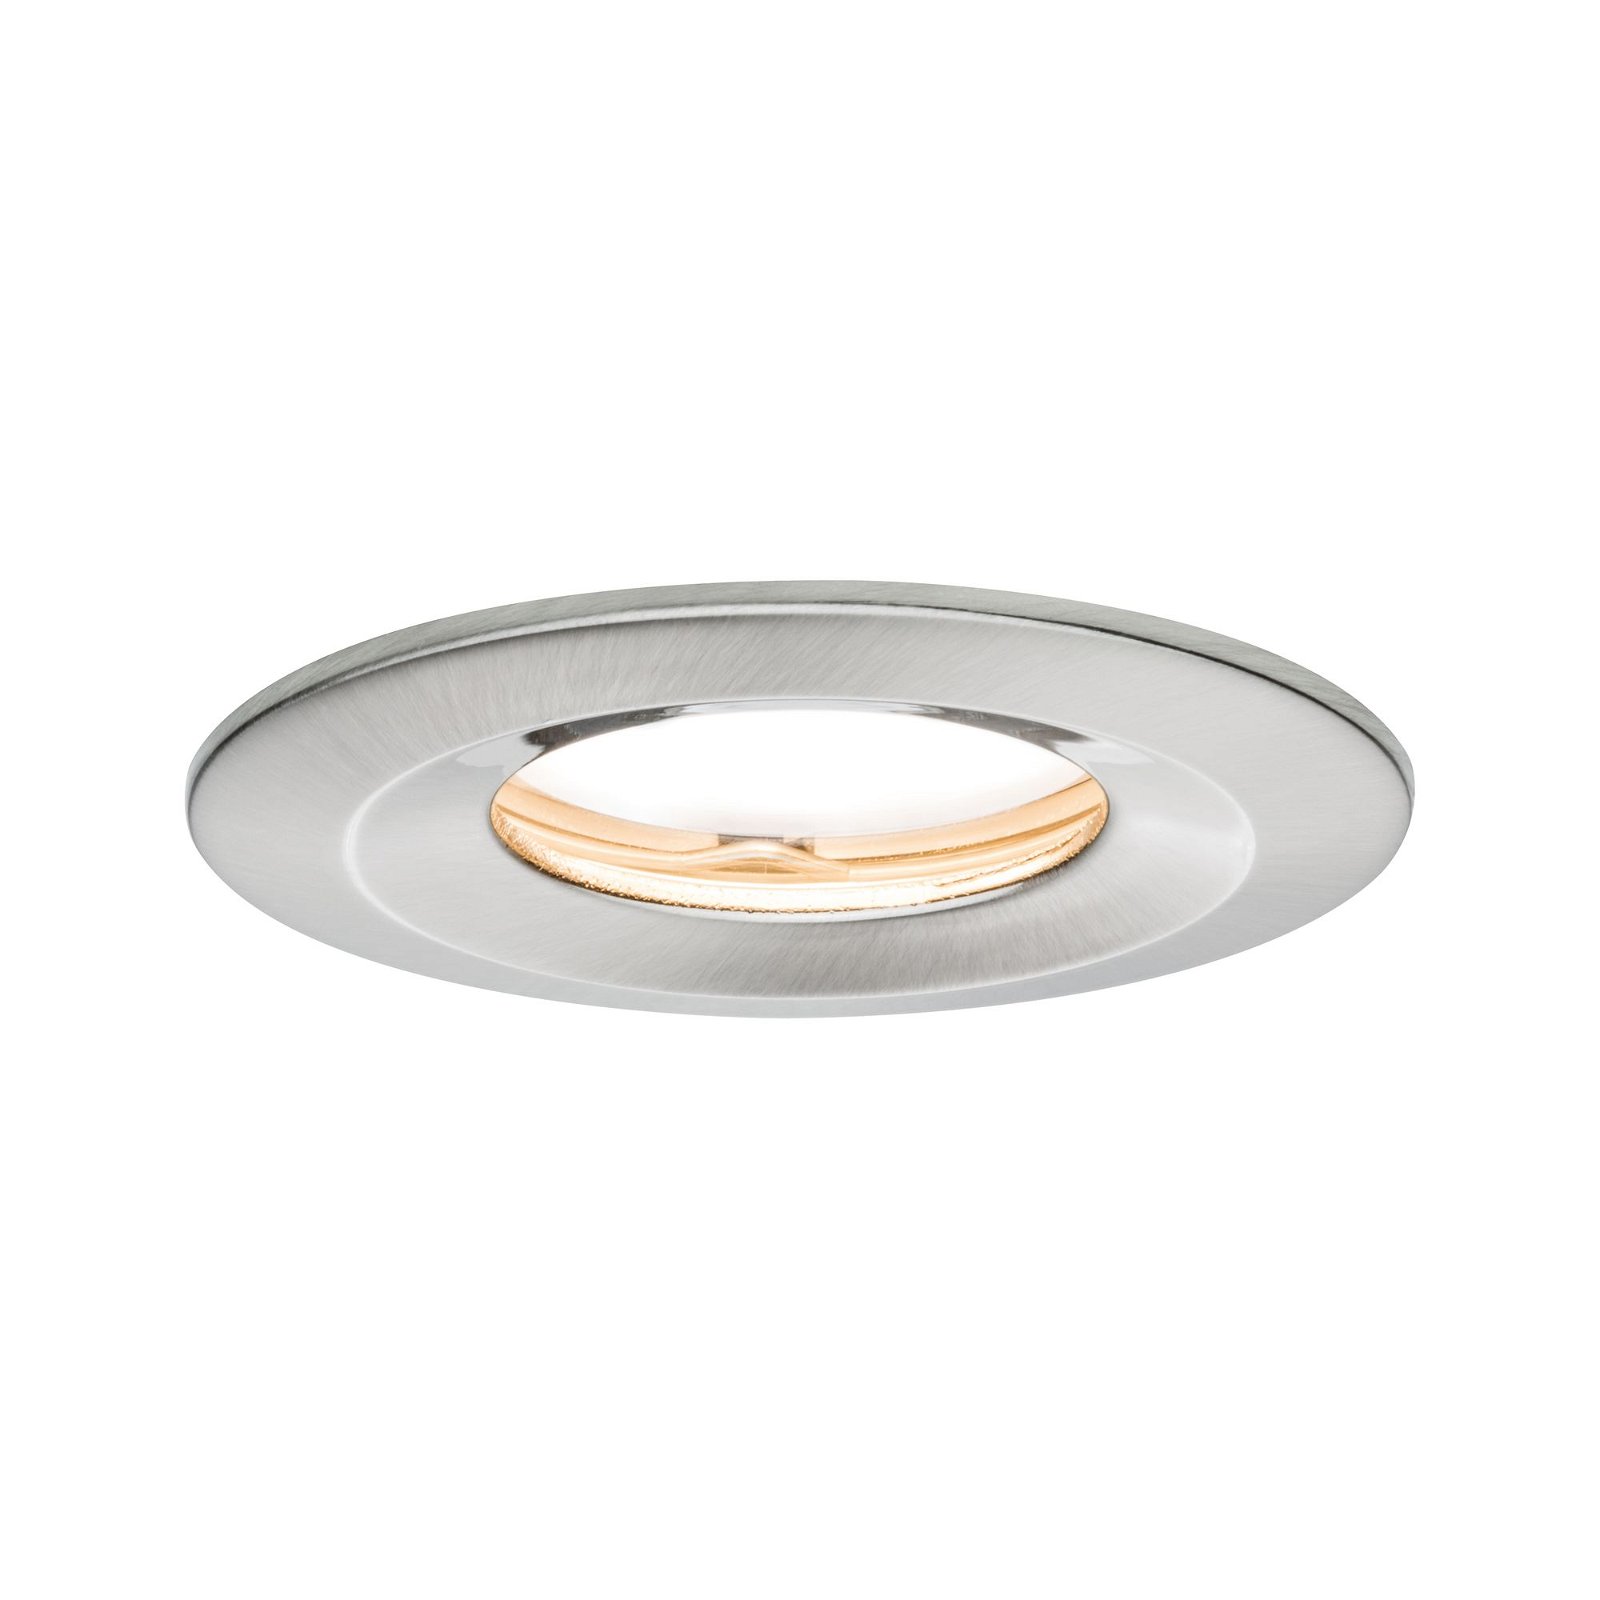 LED Recessed luminaire Nova Plus Coin Rigid IP65 round 78mm Coin 6,8W 425lm 230V dimmable 2700K Brushed iron